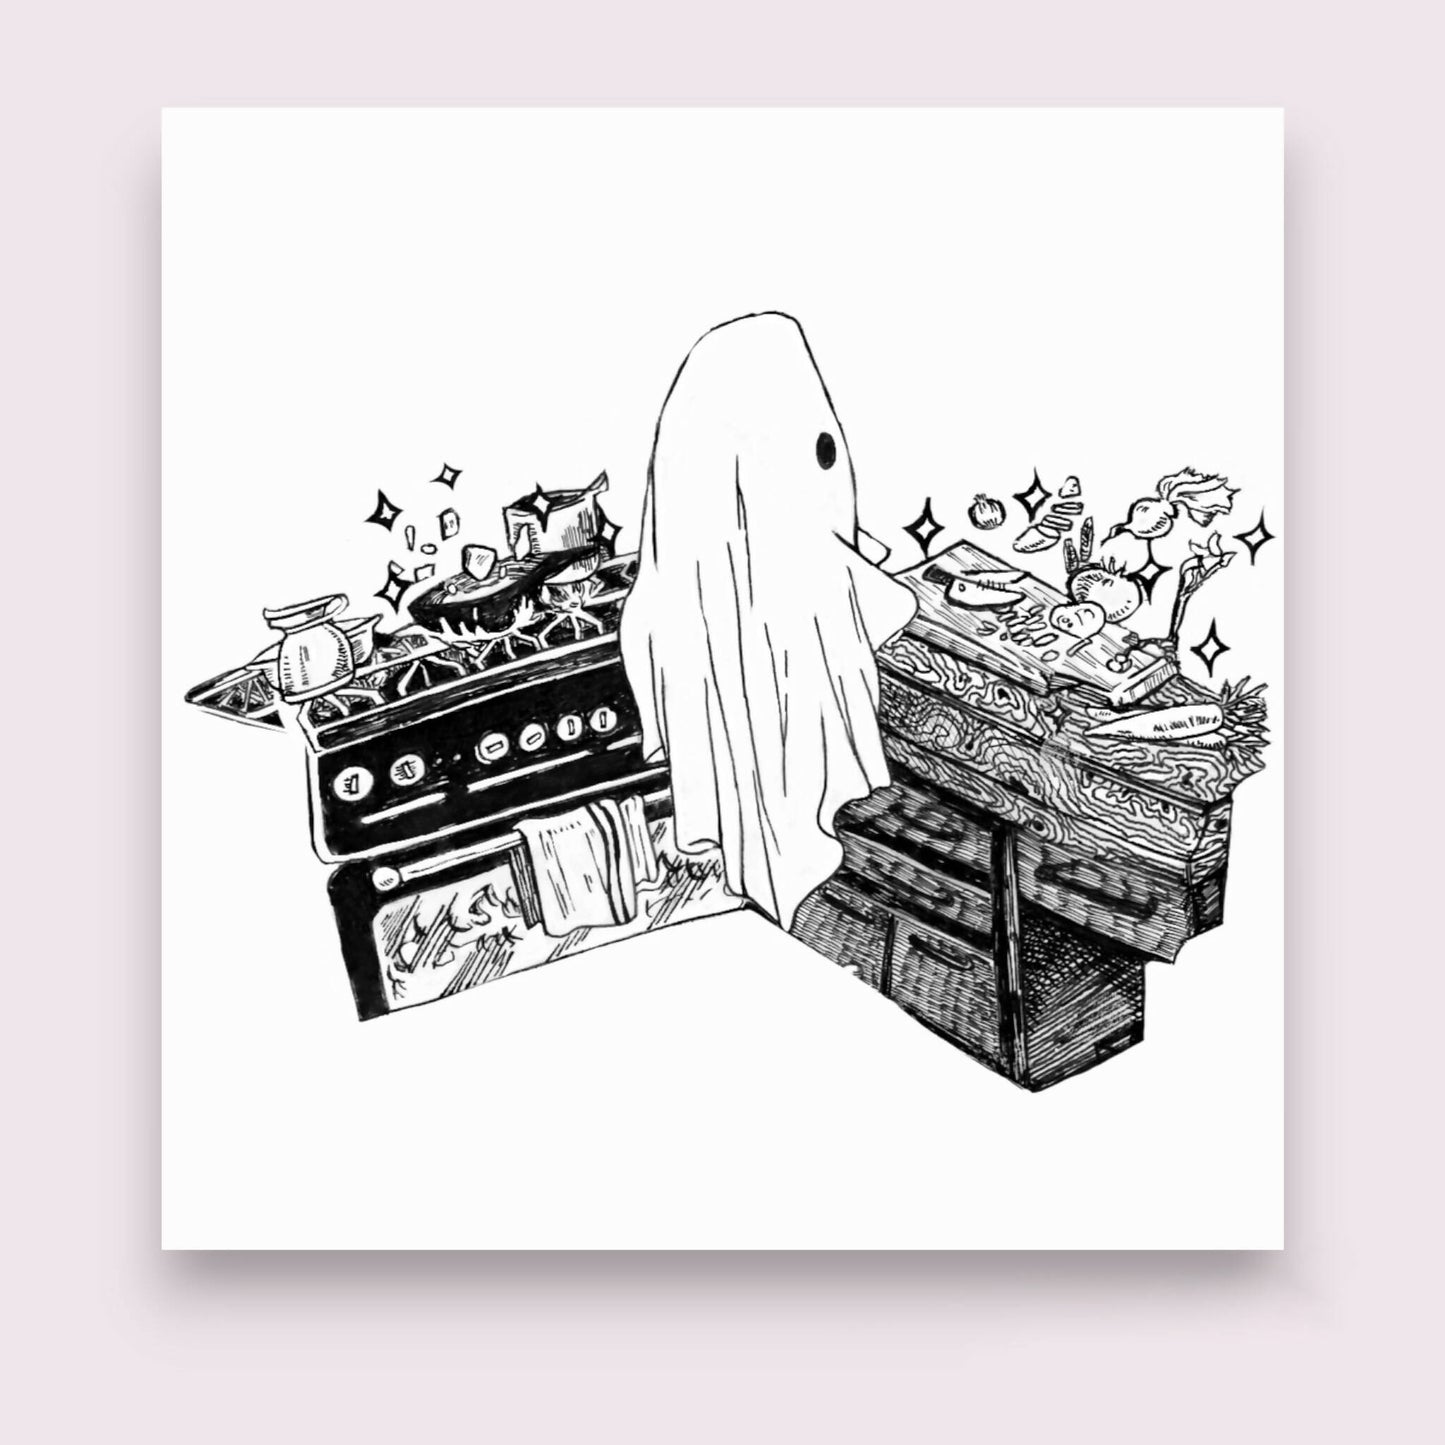 A Ghost's Day Off